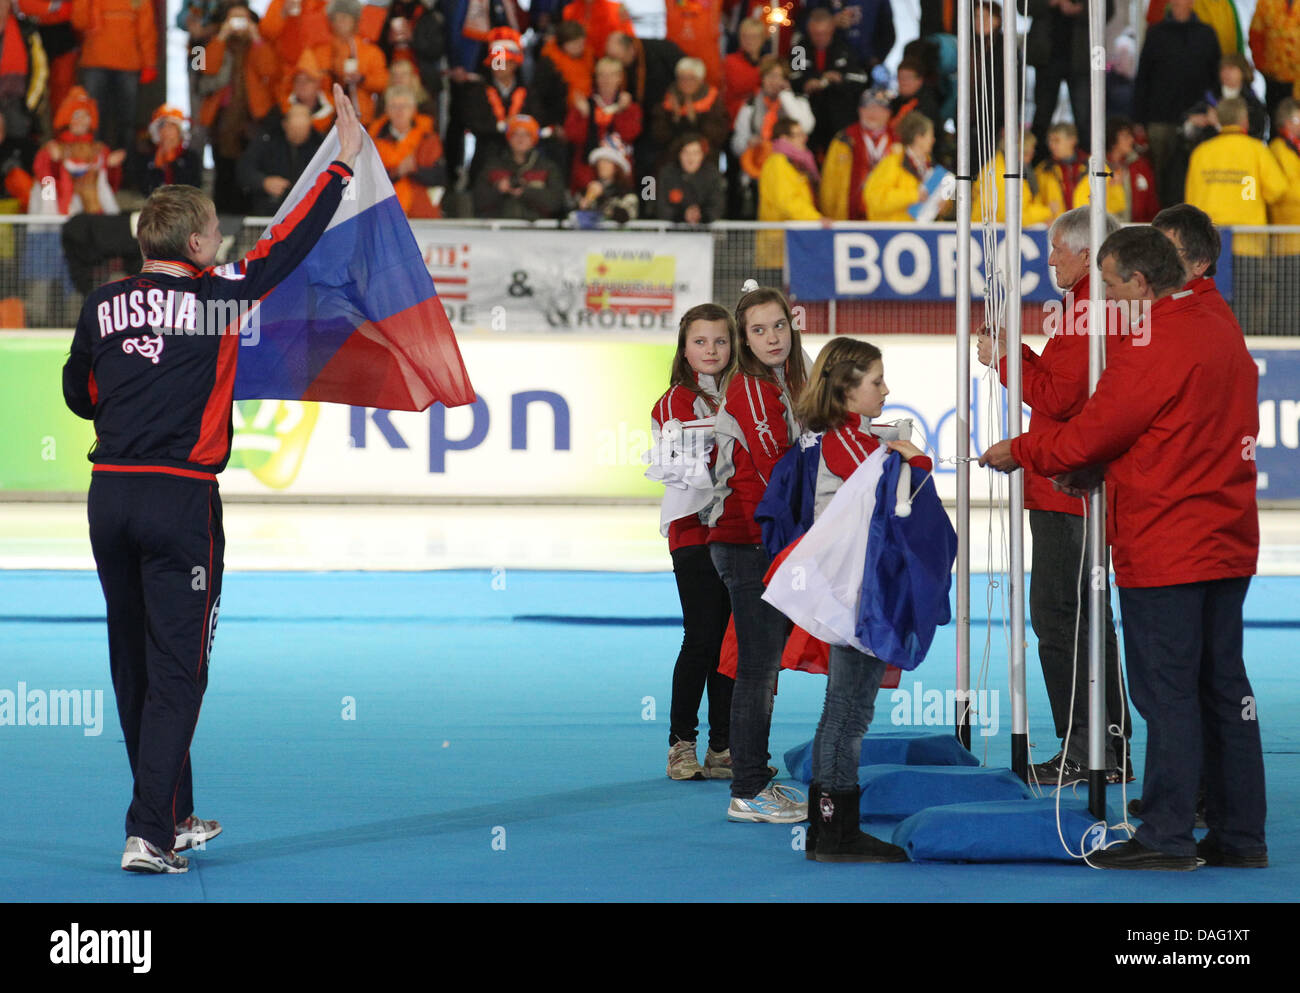 The picture shows the Russian Skater Ivan Skobrev, who came third, holding a Russian flag after the award ceremony for the 5000m men's race at the Speed-Skating World Championship at the 'Max Aicher Arena' in Inzell, Bavaria, Germany on 11 March 2011. At the award ceremony the French flag instead of the Russian flag had been hoisted by mistake. PHOTO: FRISO GENTSCH Stock Photo